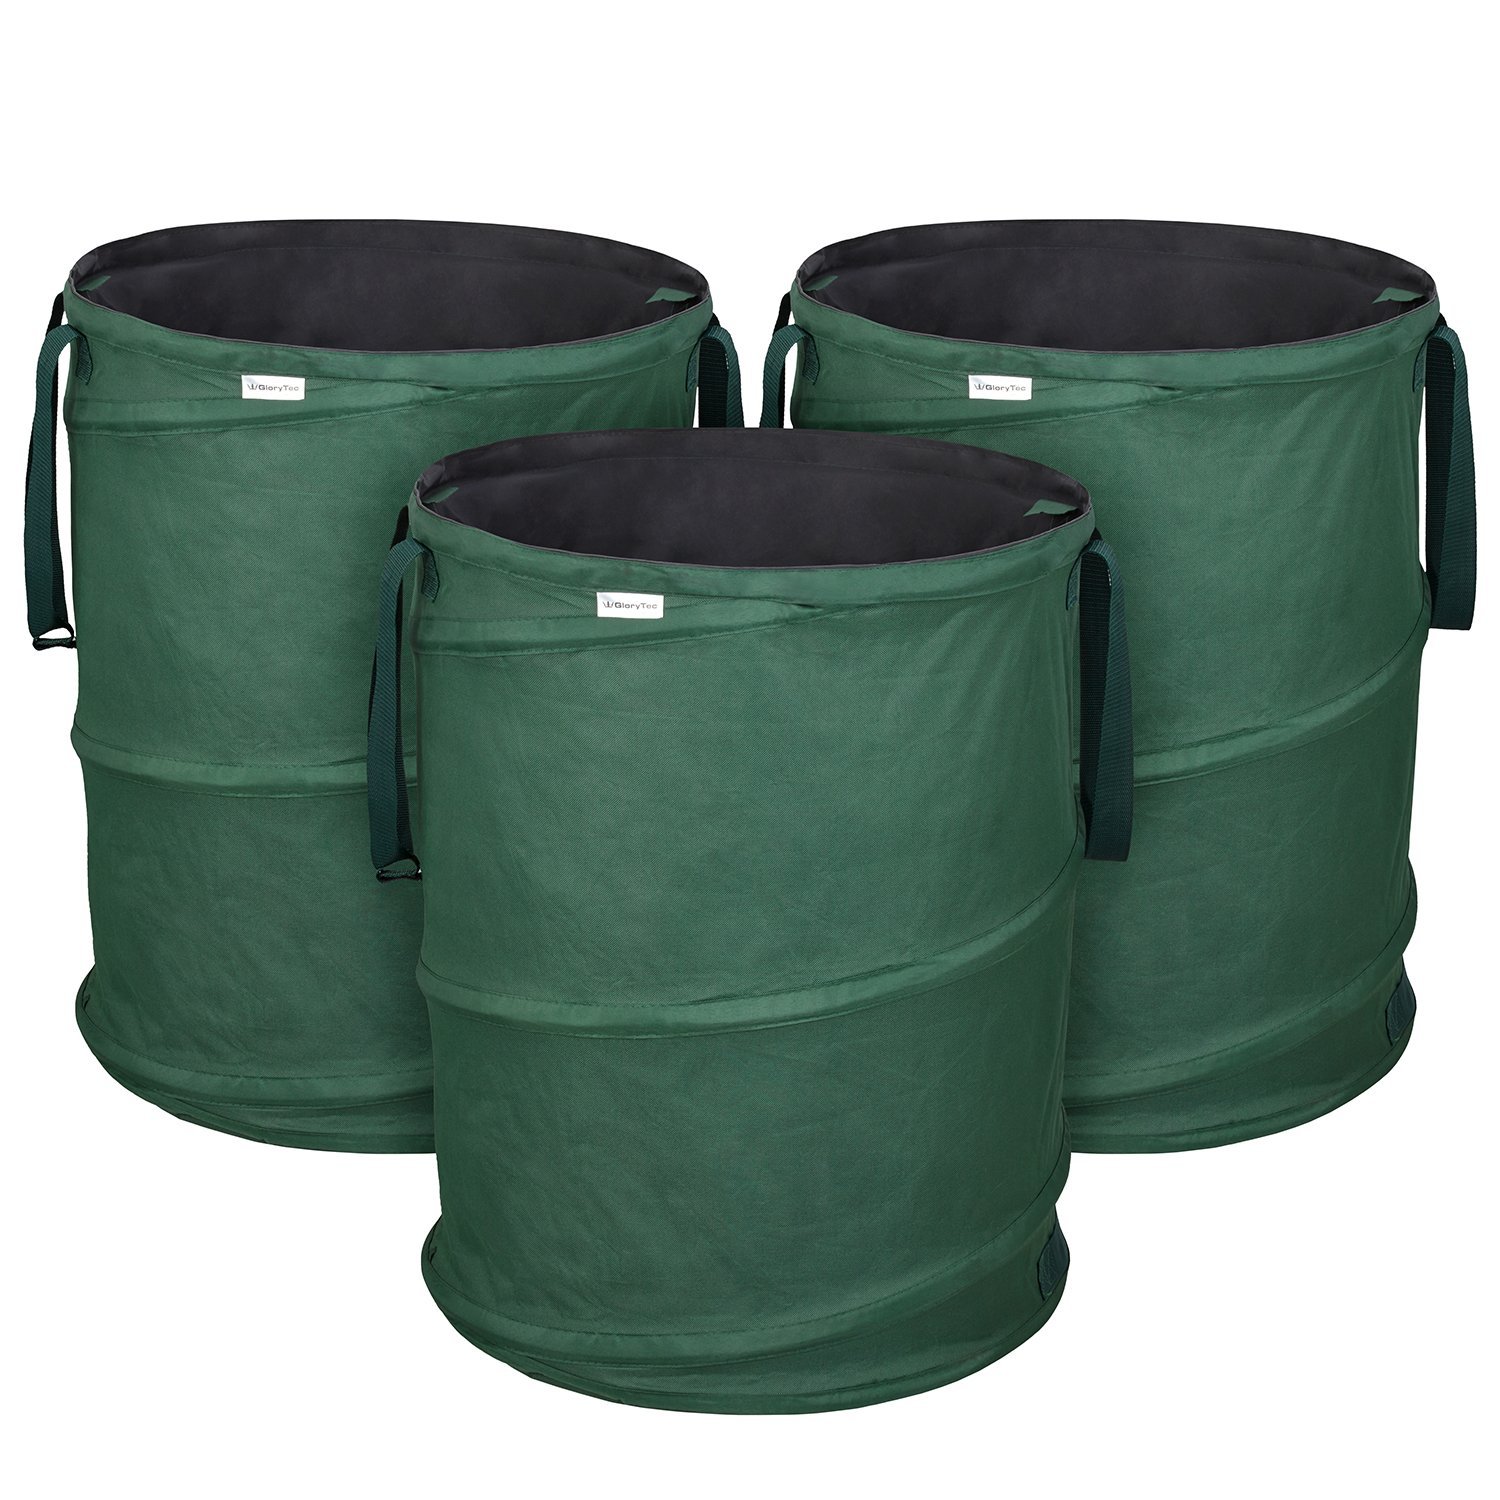 AIOIAI Garden Bags 45 Gallons Each - Collapsible Self-Erecting Gardening Bag - Comparative-Winner 2018 - Reusable Trash Can for Leaf, Lawn and Yard Waste - Premium Bagster with Spring Bucket 